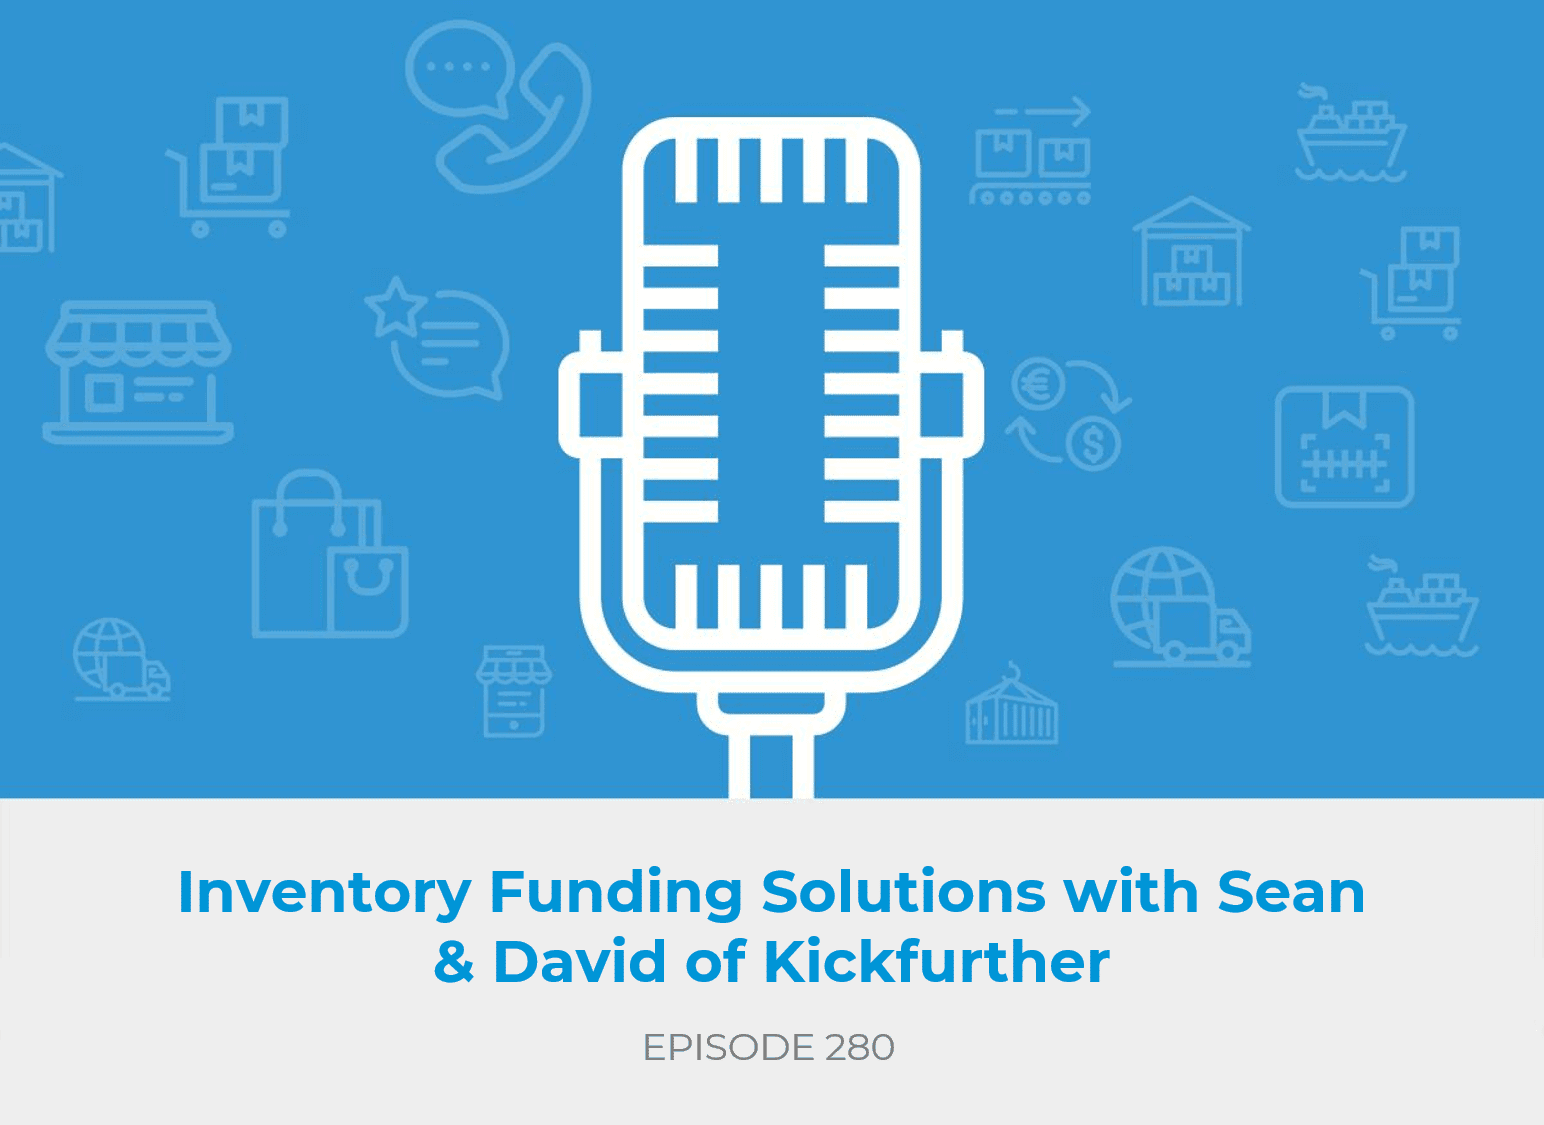 Inventory Funding Solutions with Sean & David of Kickfurther